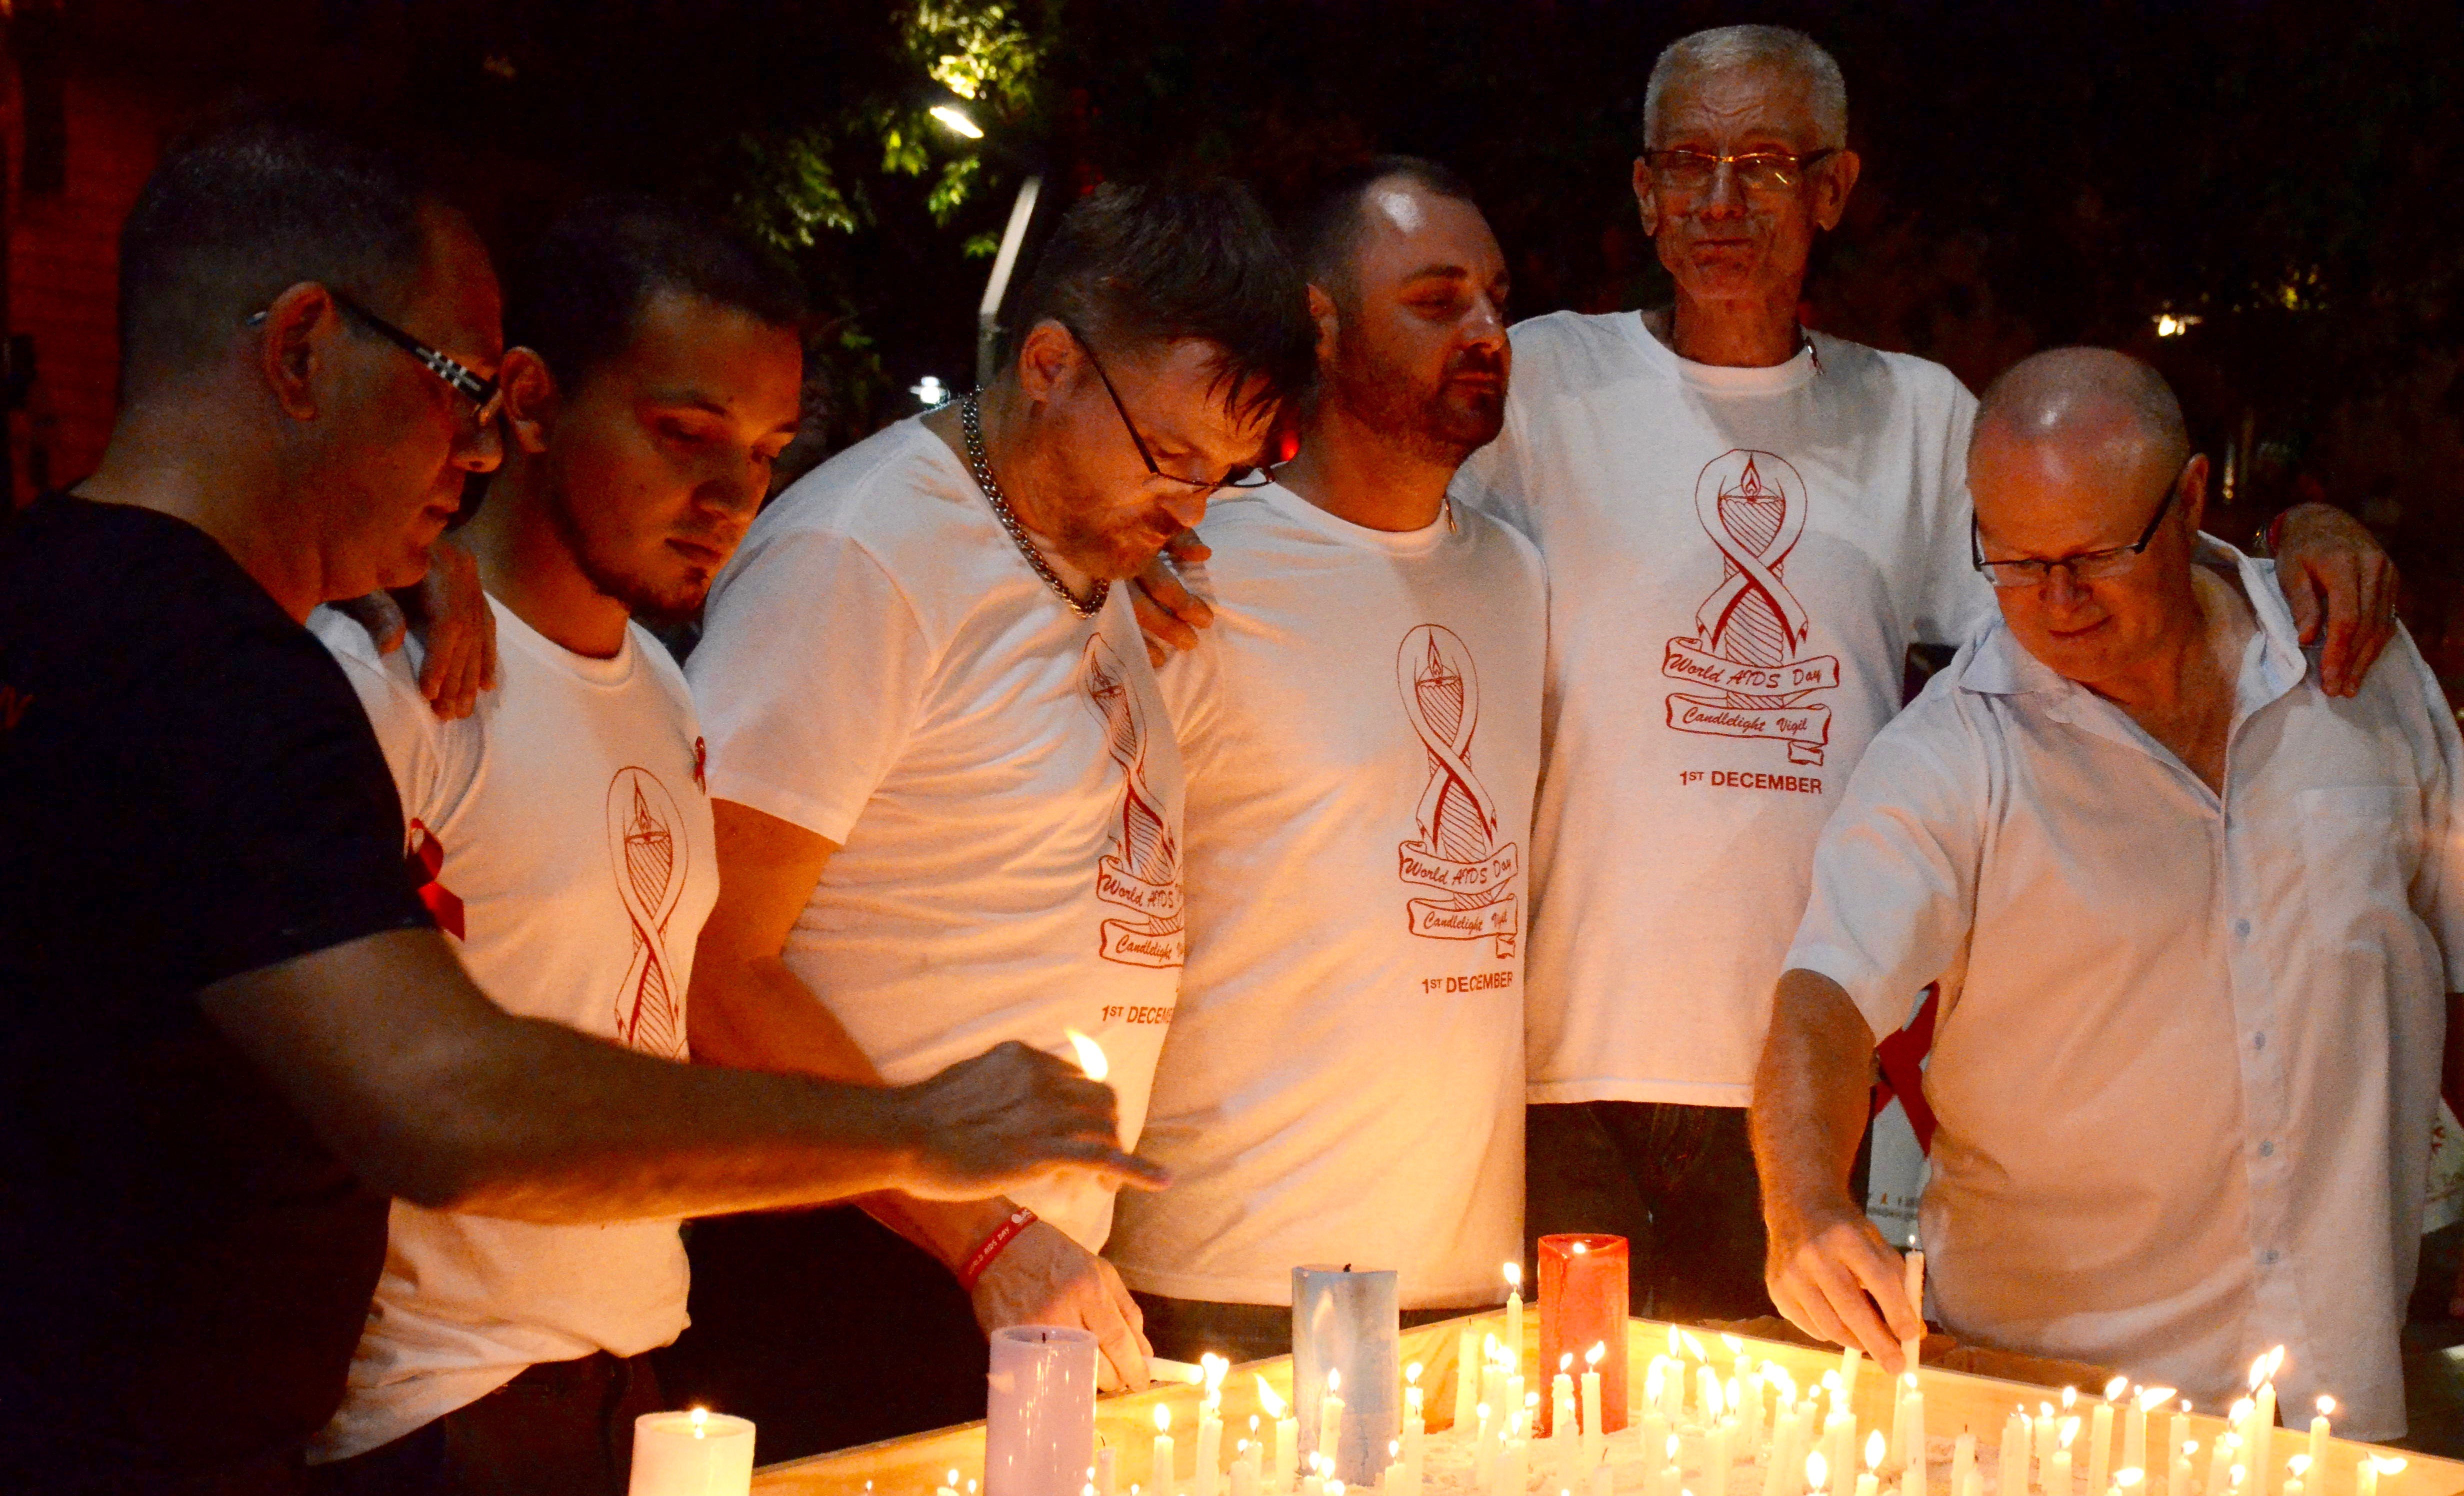 Moving vigils and HIV funding news marks World AIDS Day in Queensland